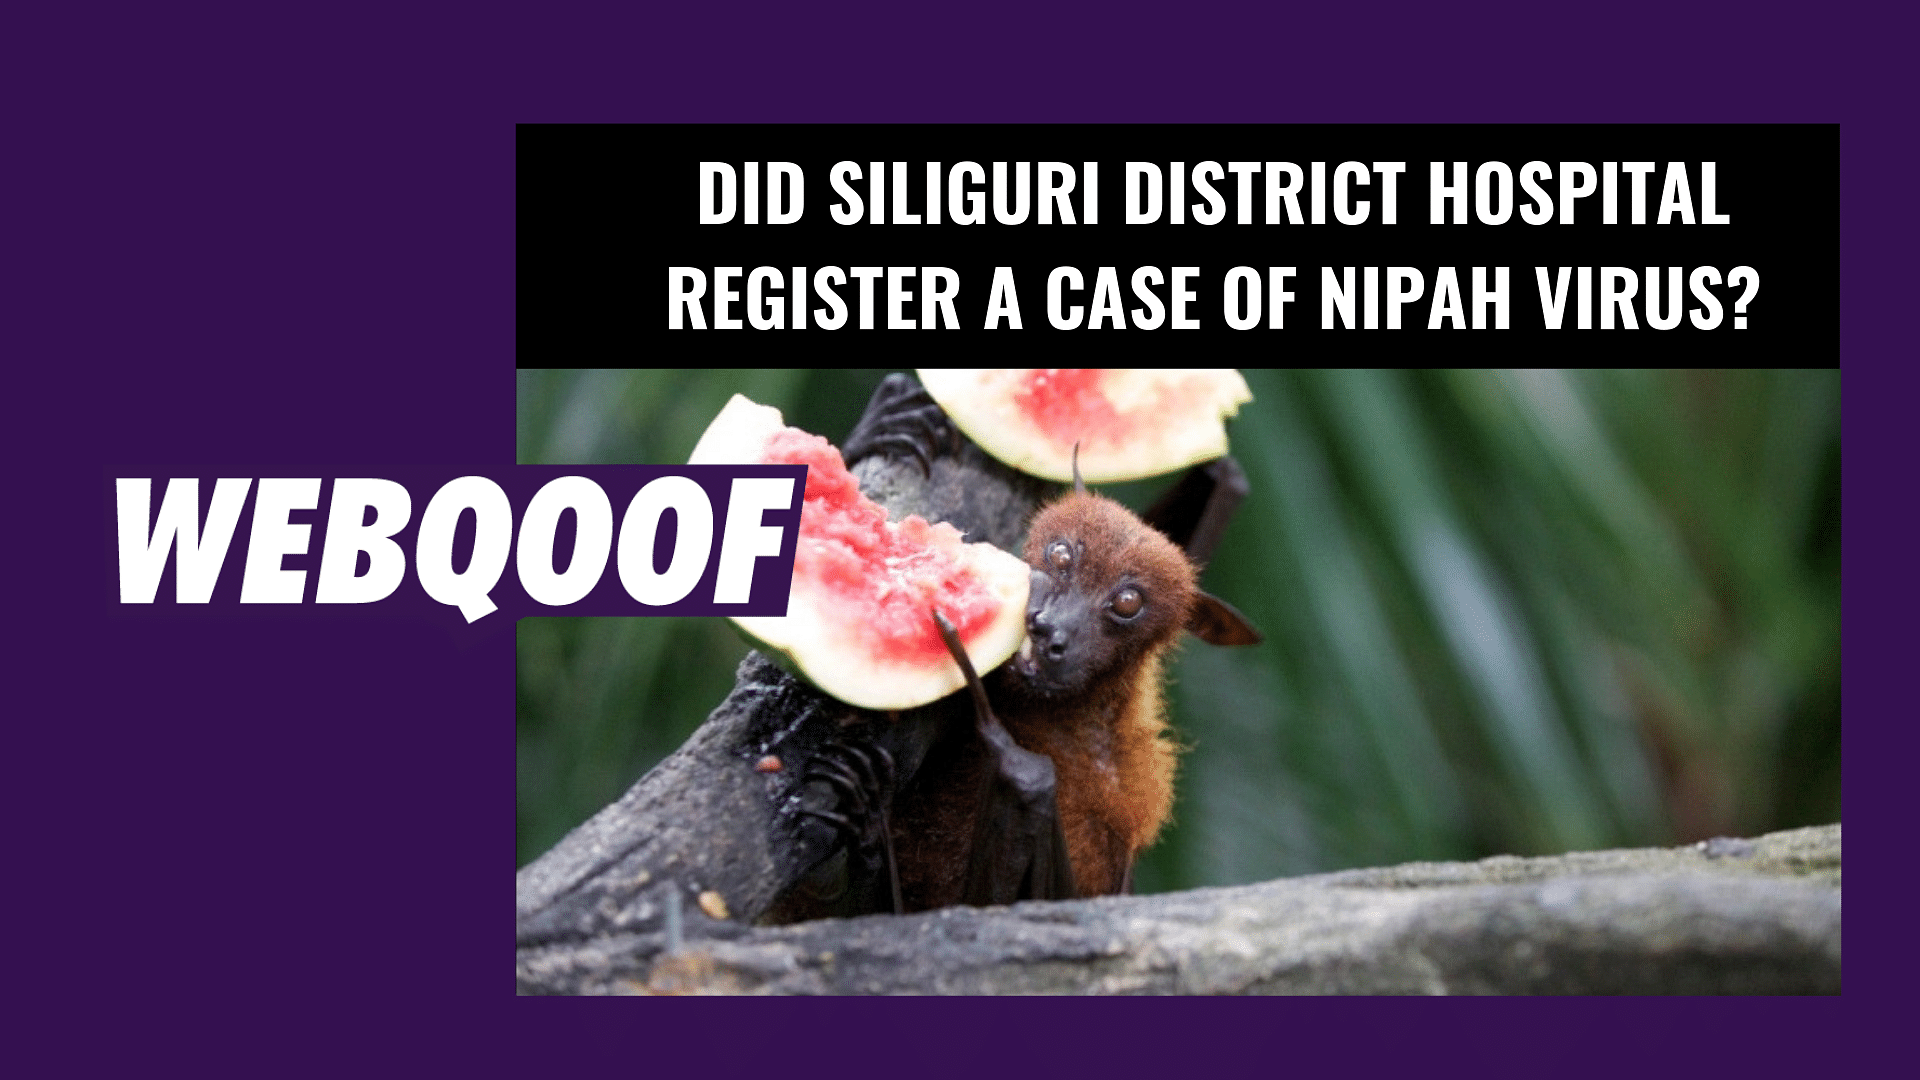 A message has been doing the rounds on social media claiming that cases of Nipah virus have been registered at the Siliguri District Hospital.